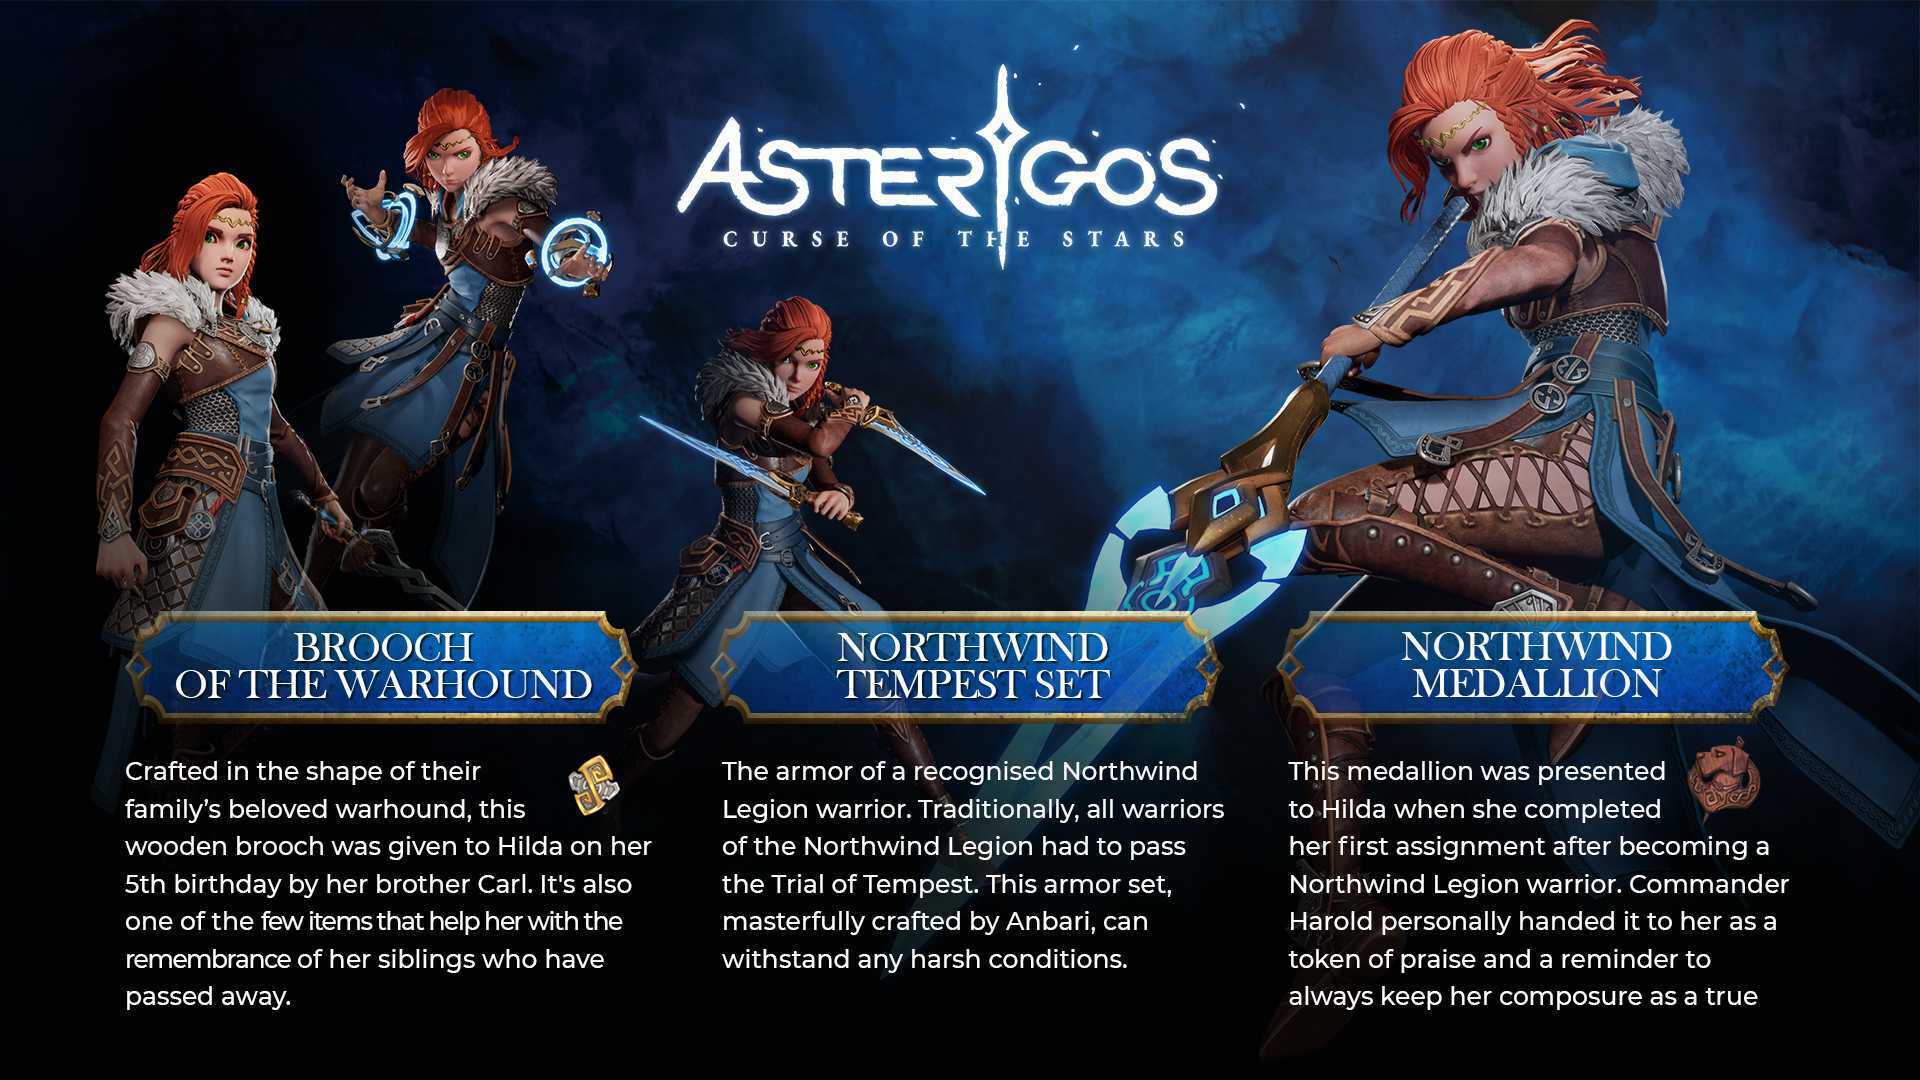 instal the last version for windows Asterigos: Curse of the Stars